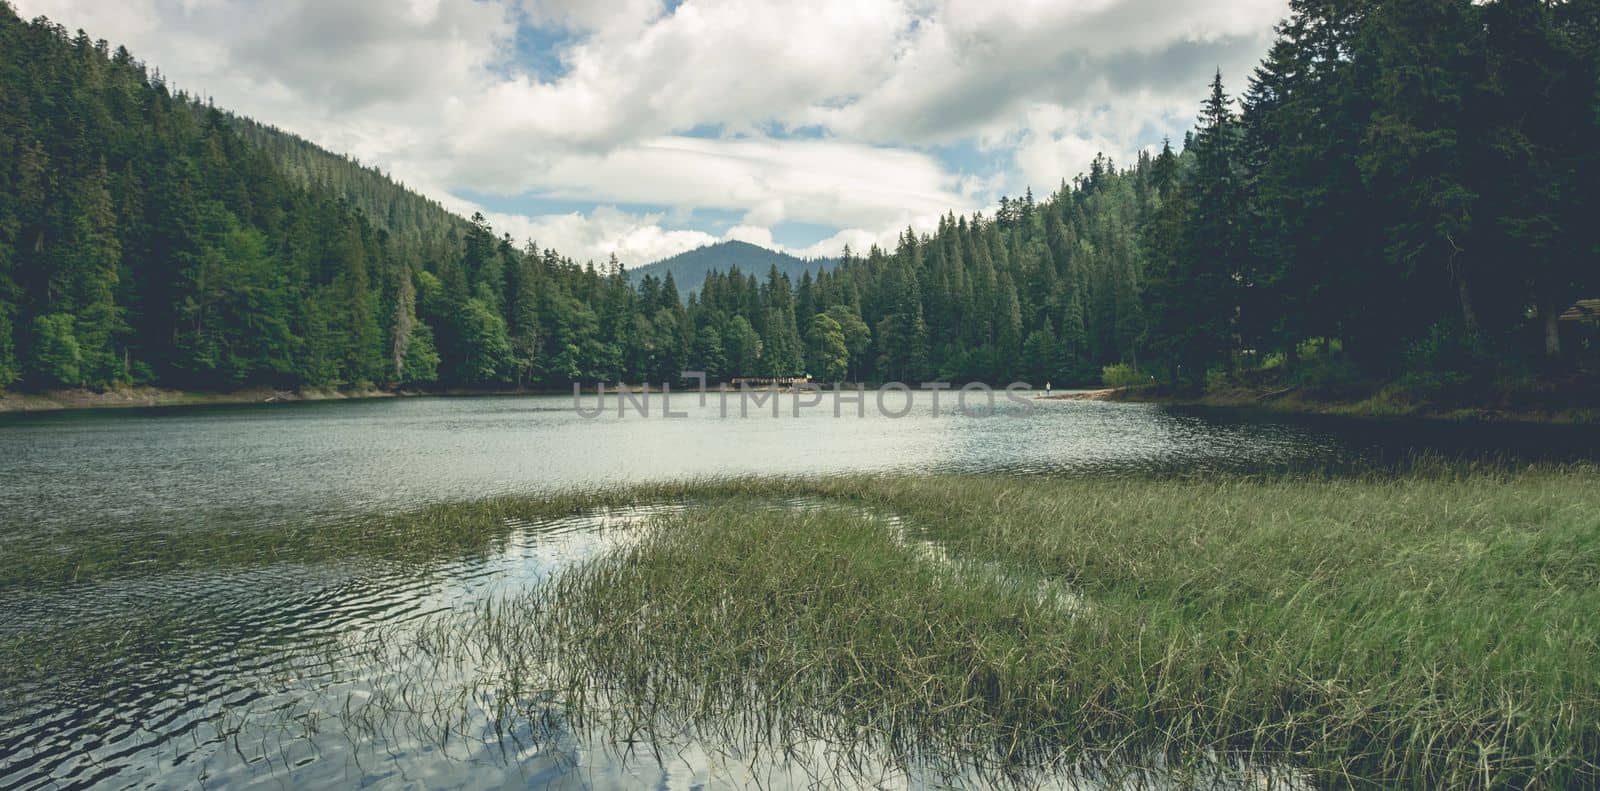 Beautiful lake surrounded by pine forest in the mountains. Wild nature in national park